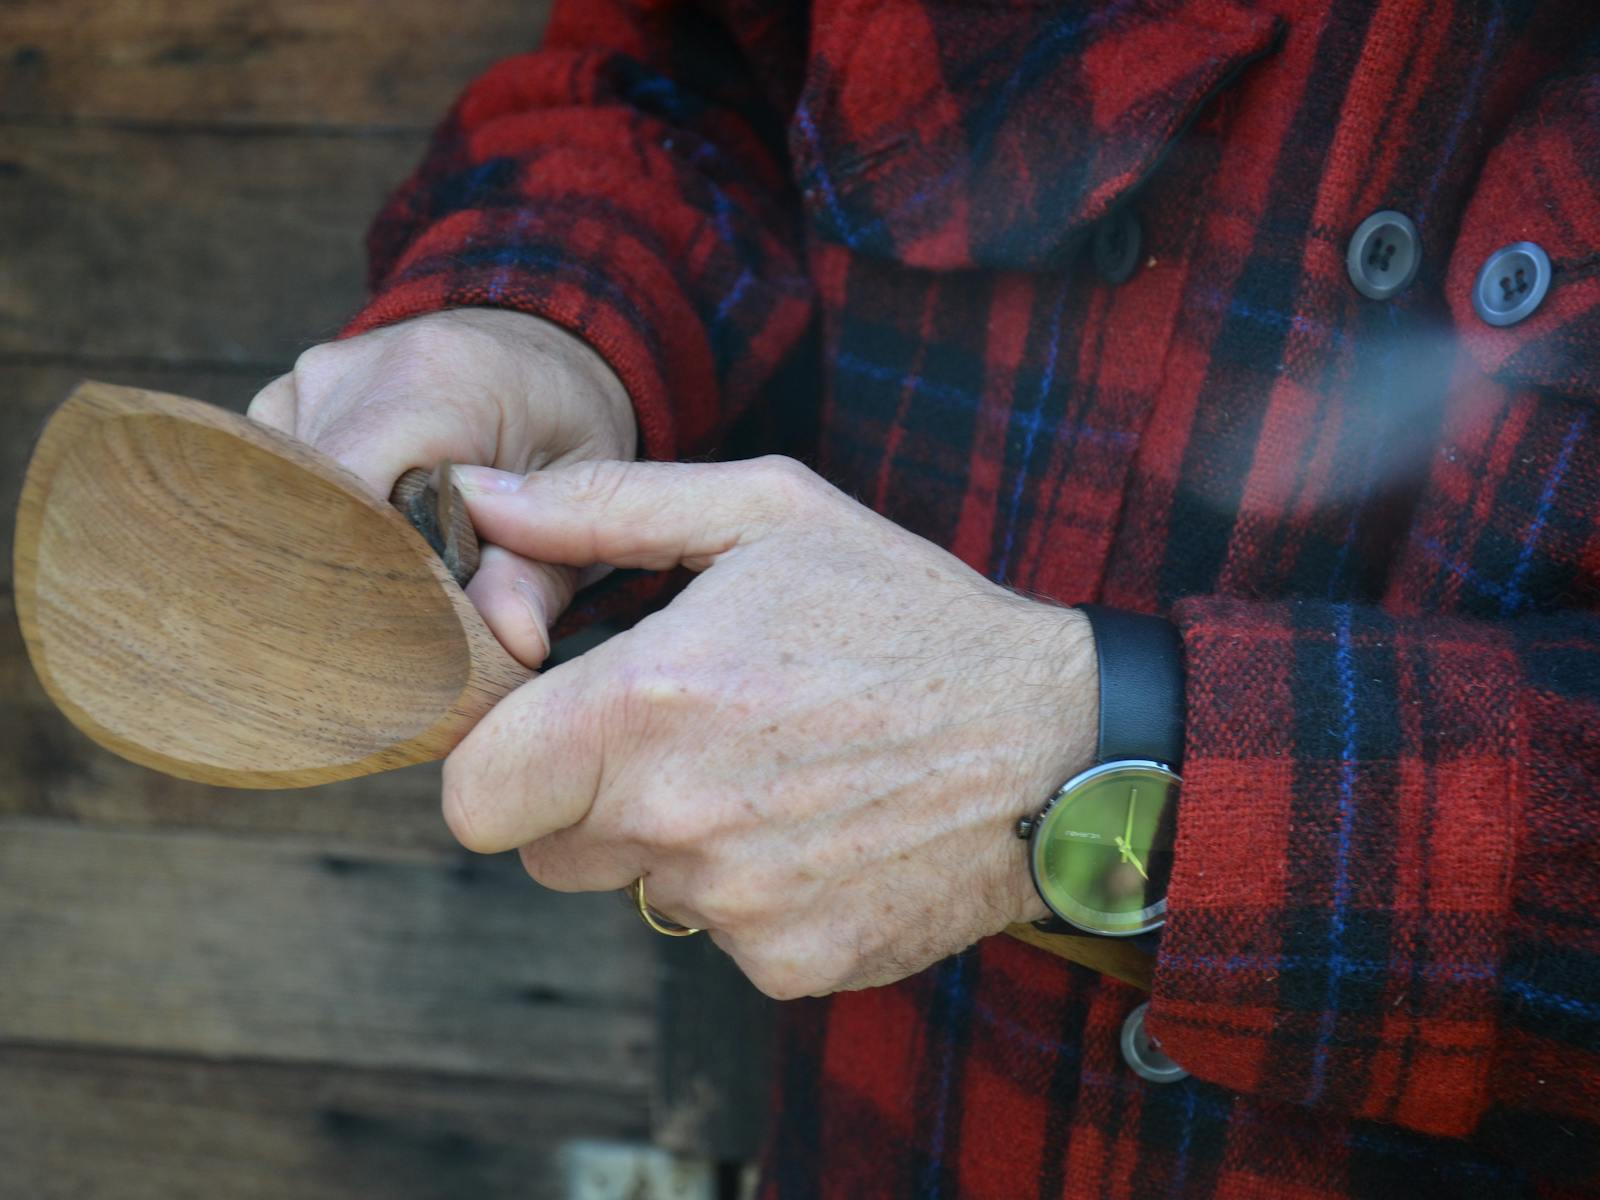 David of Phoenix Creations, hand carving a spoon.